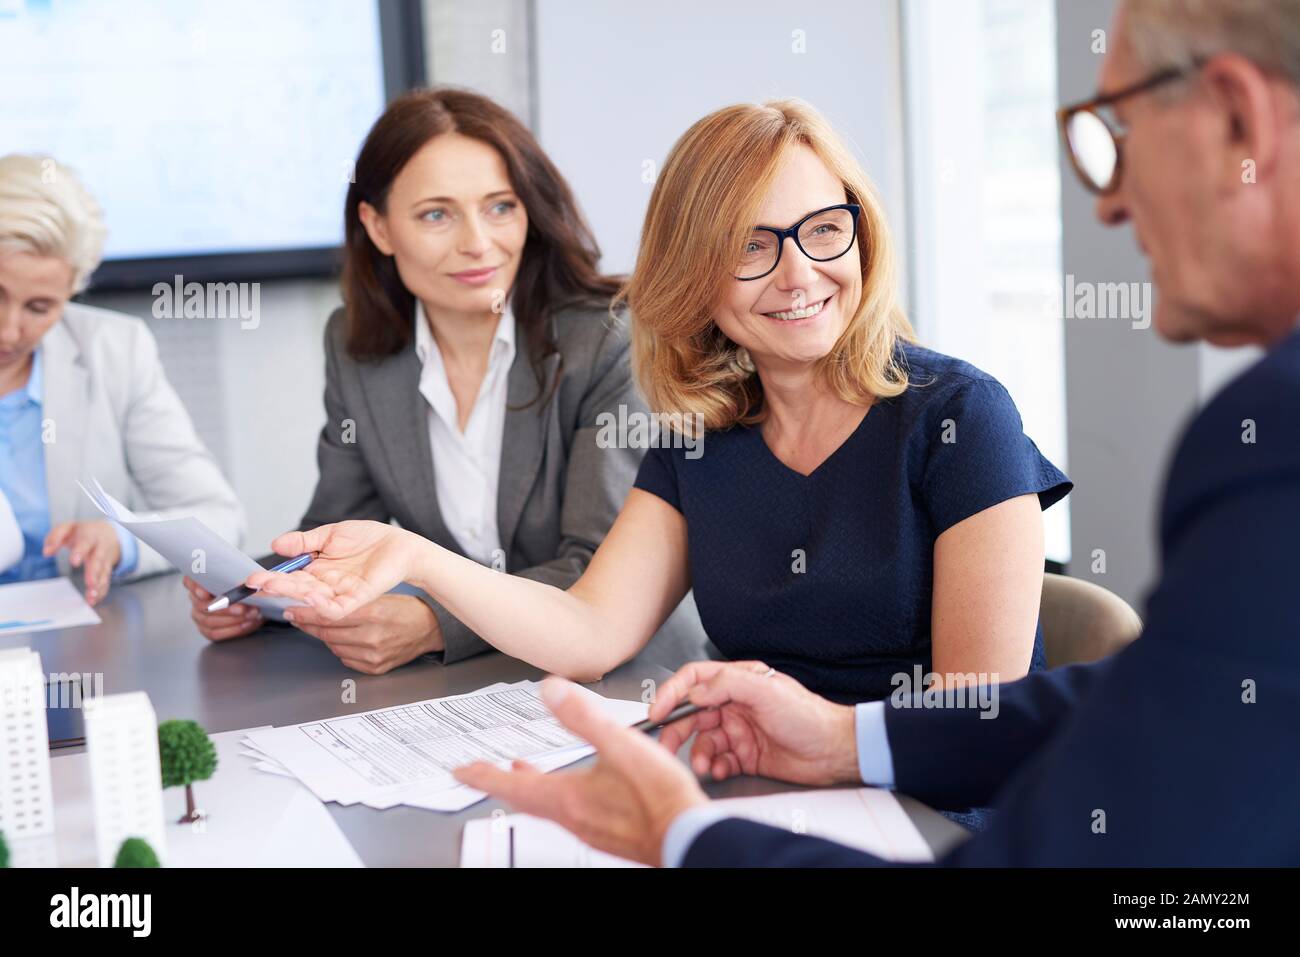 Business woman presented new solutions Stock Photo